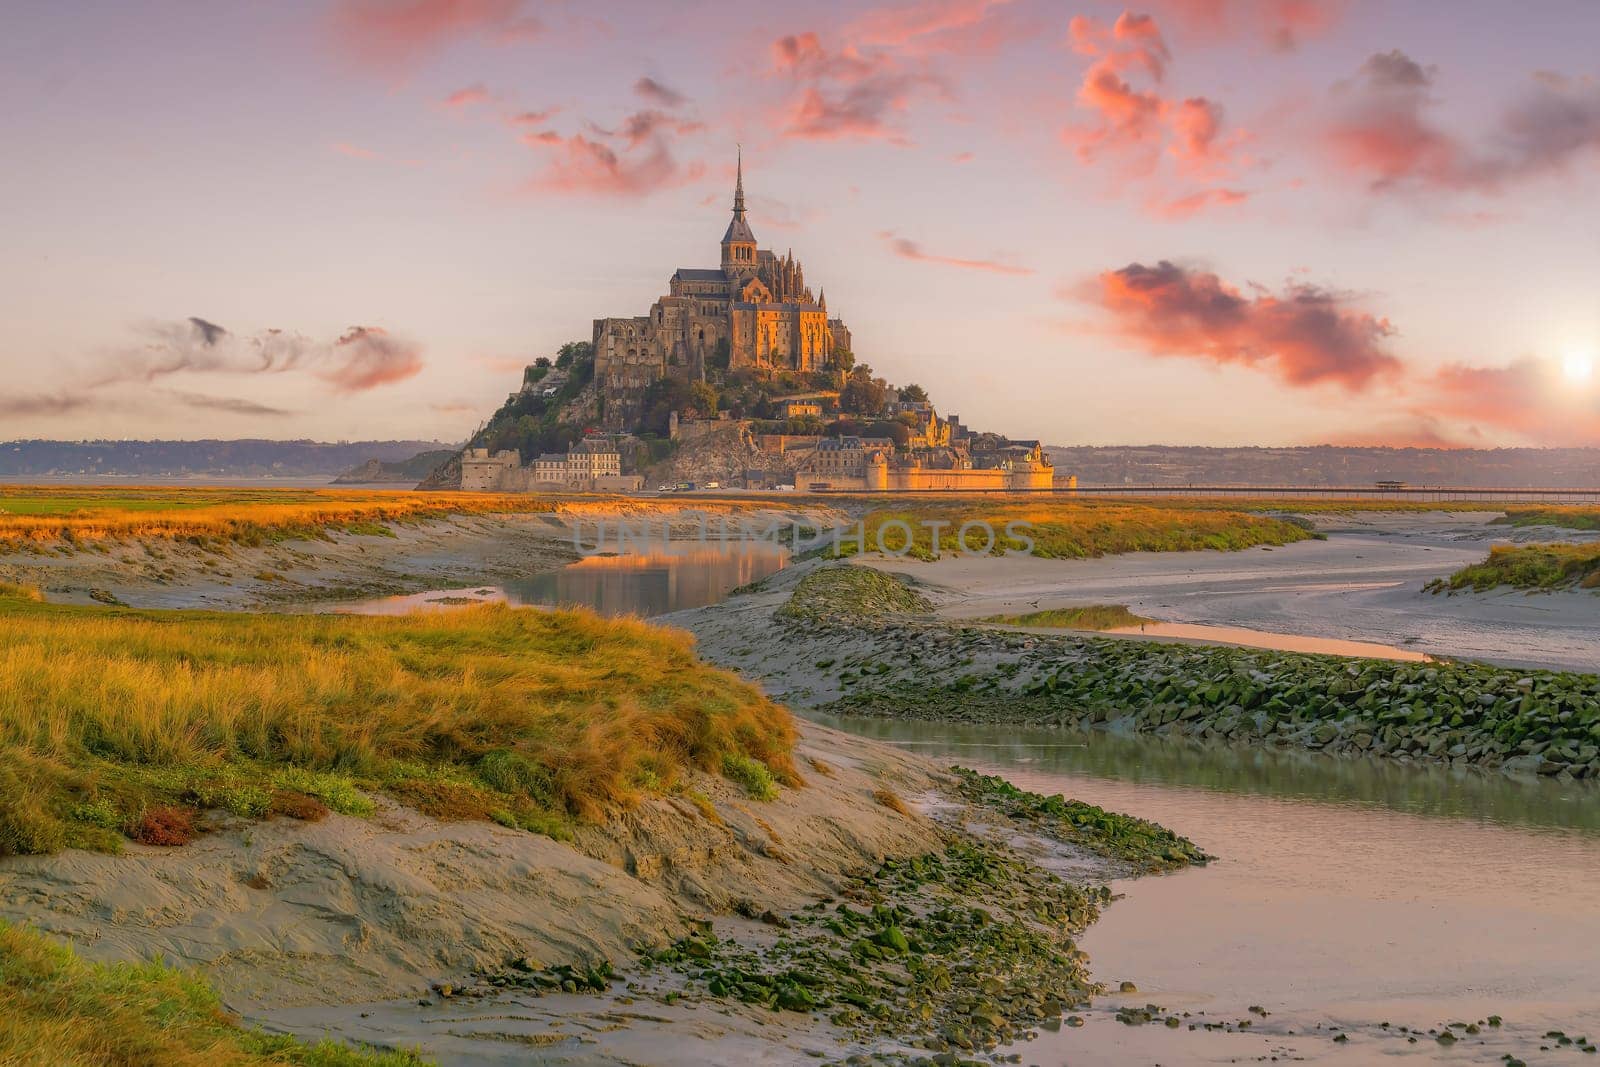 Famous Le Mont Saint-Michel tidal island in Normandy, France by f11photo